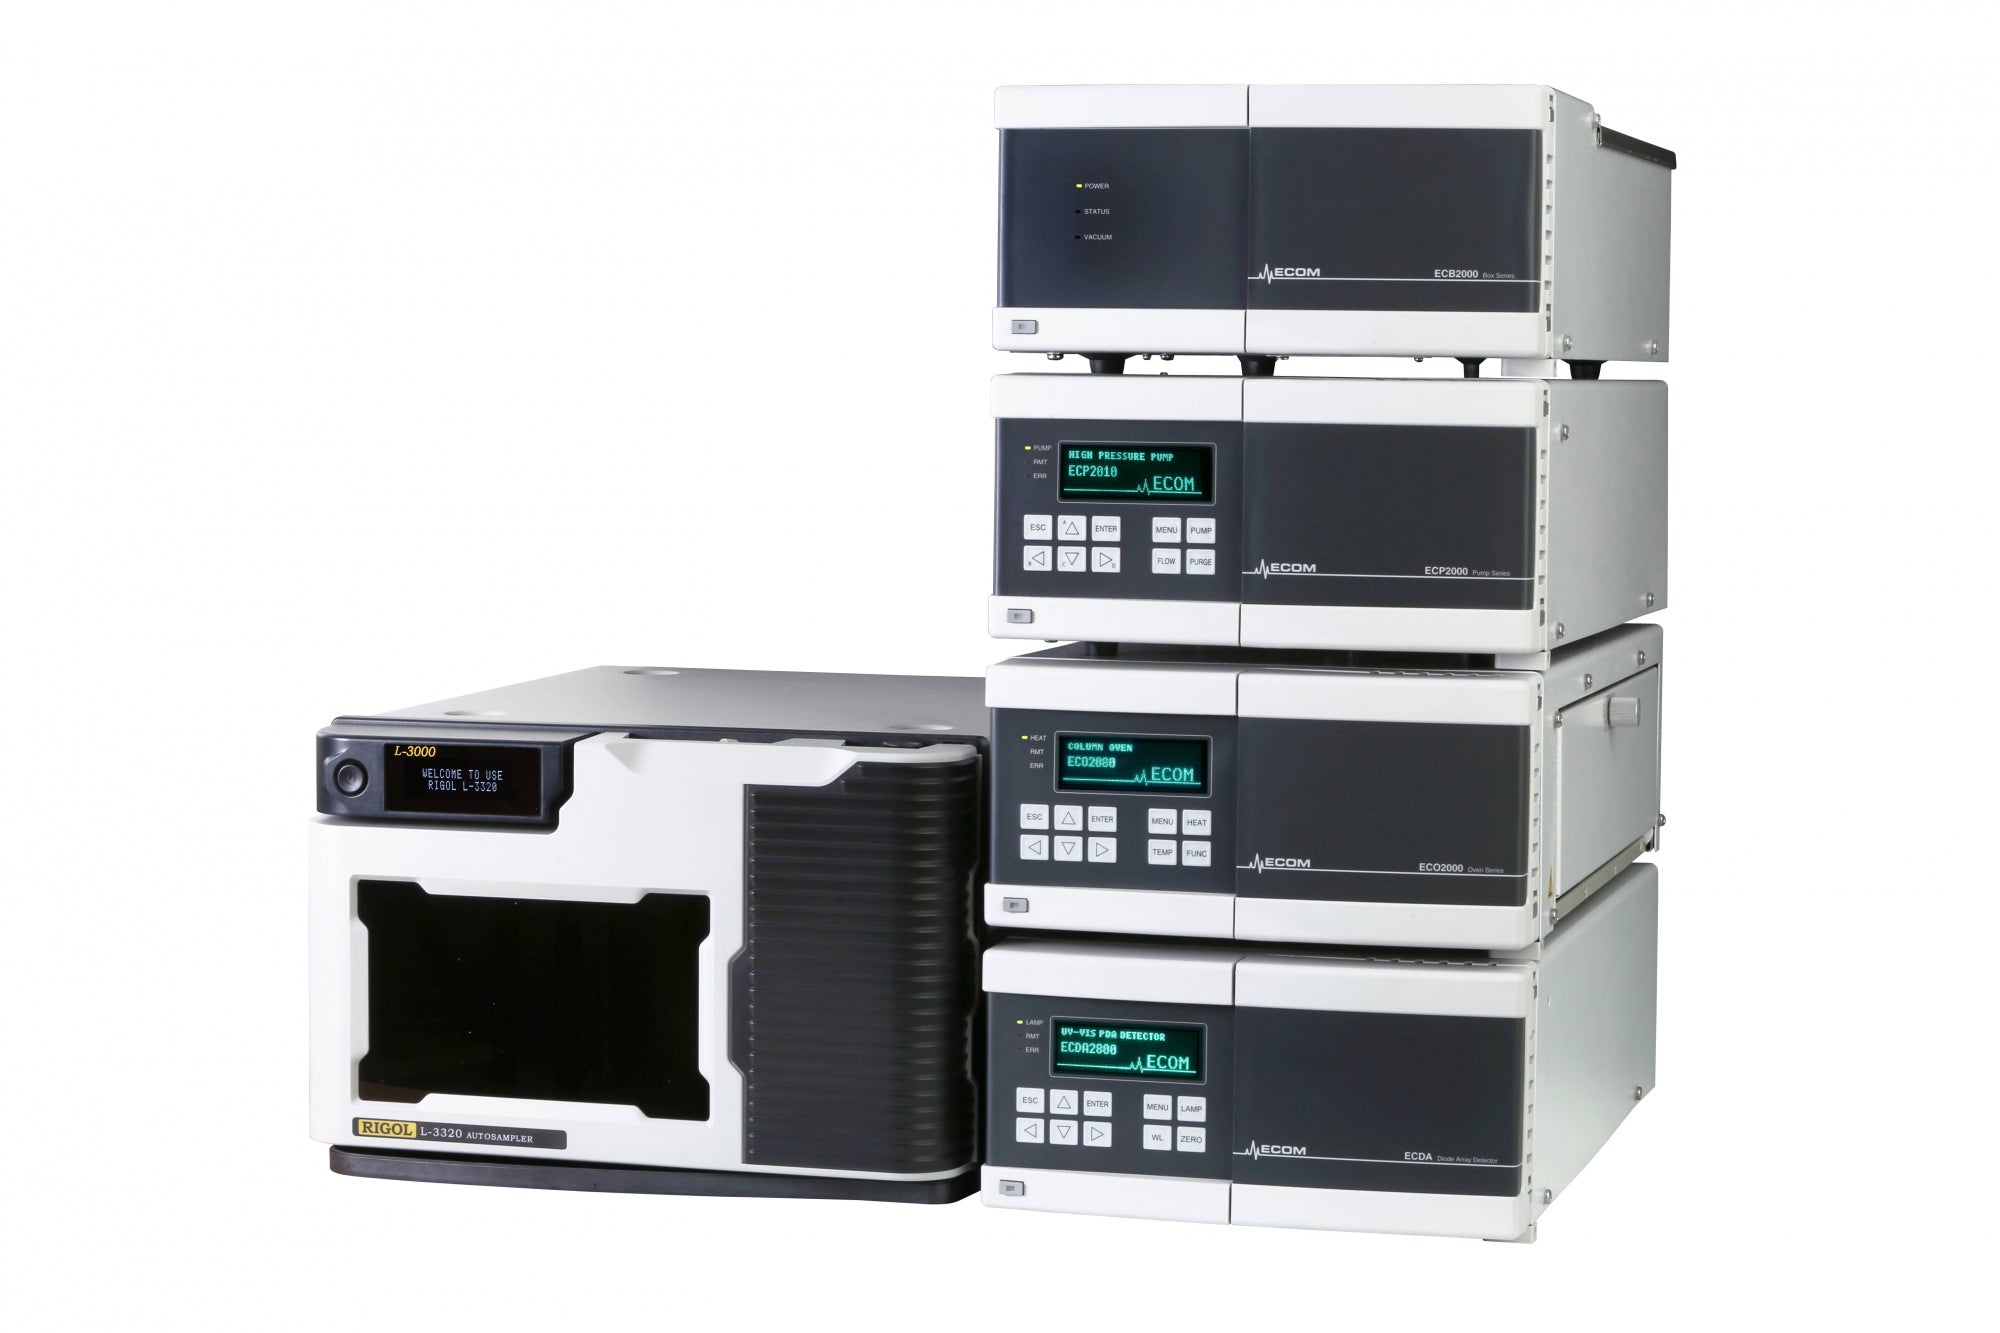 Analytical HPLC Systems